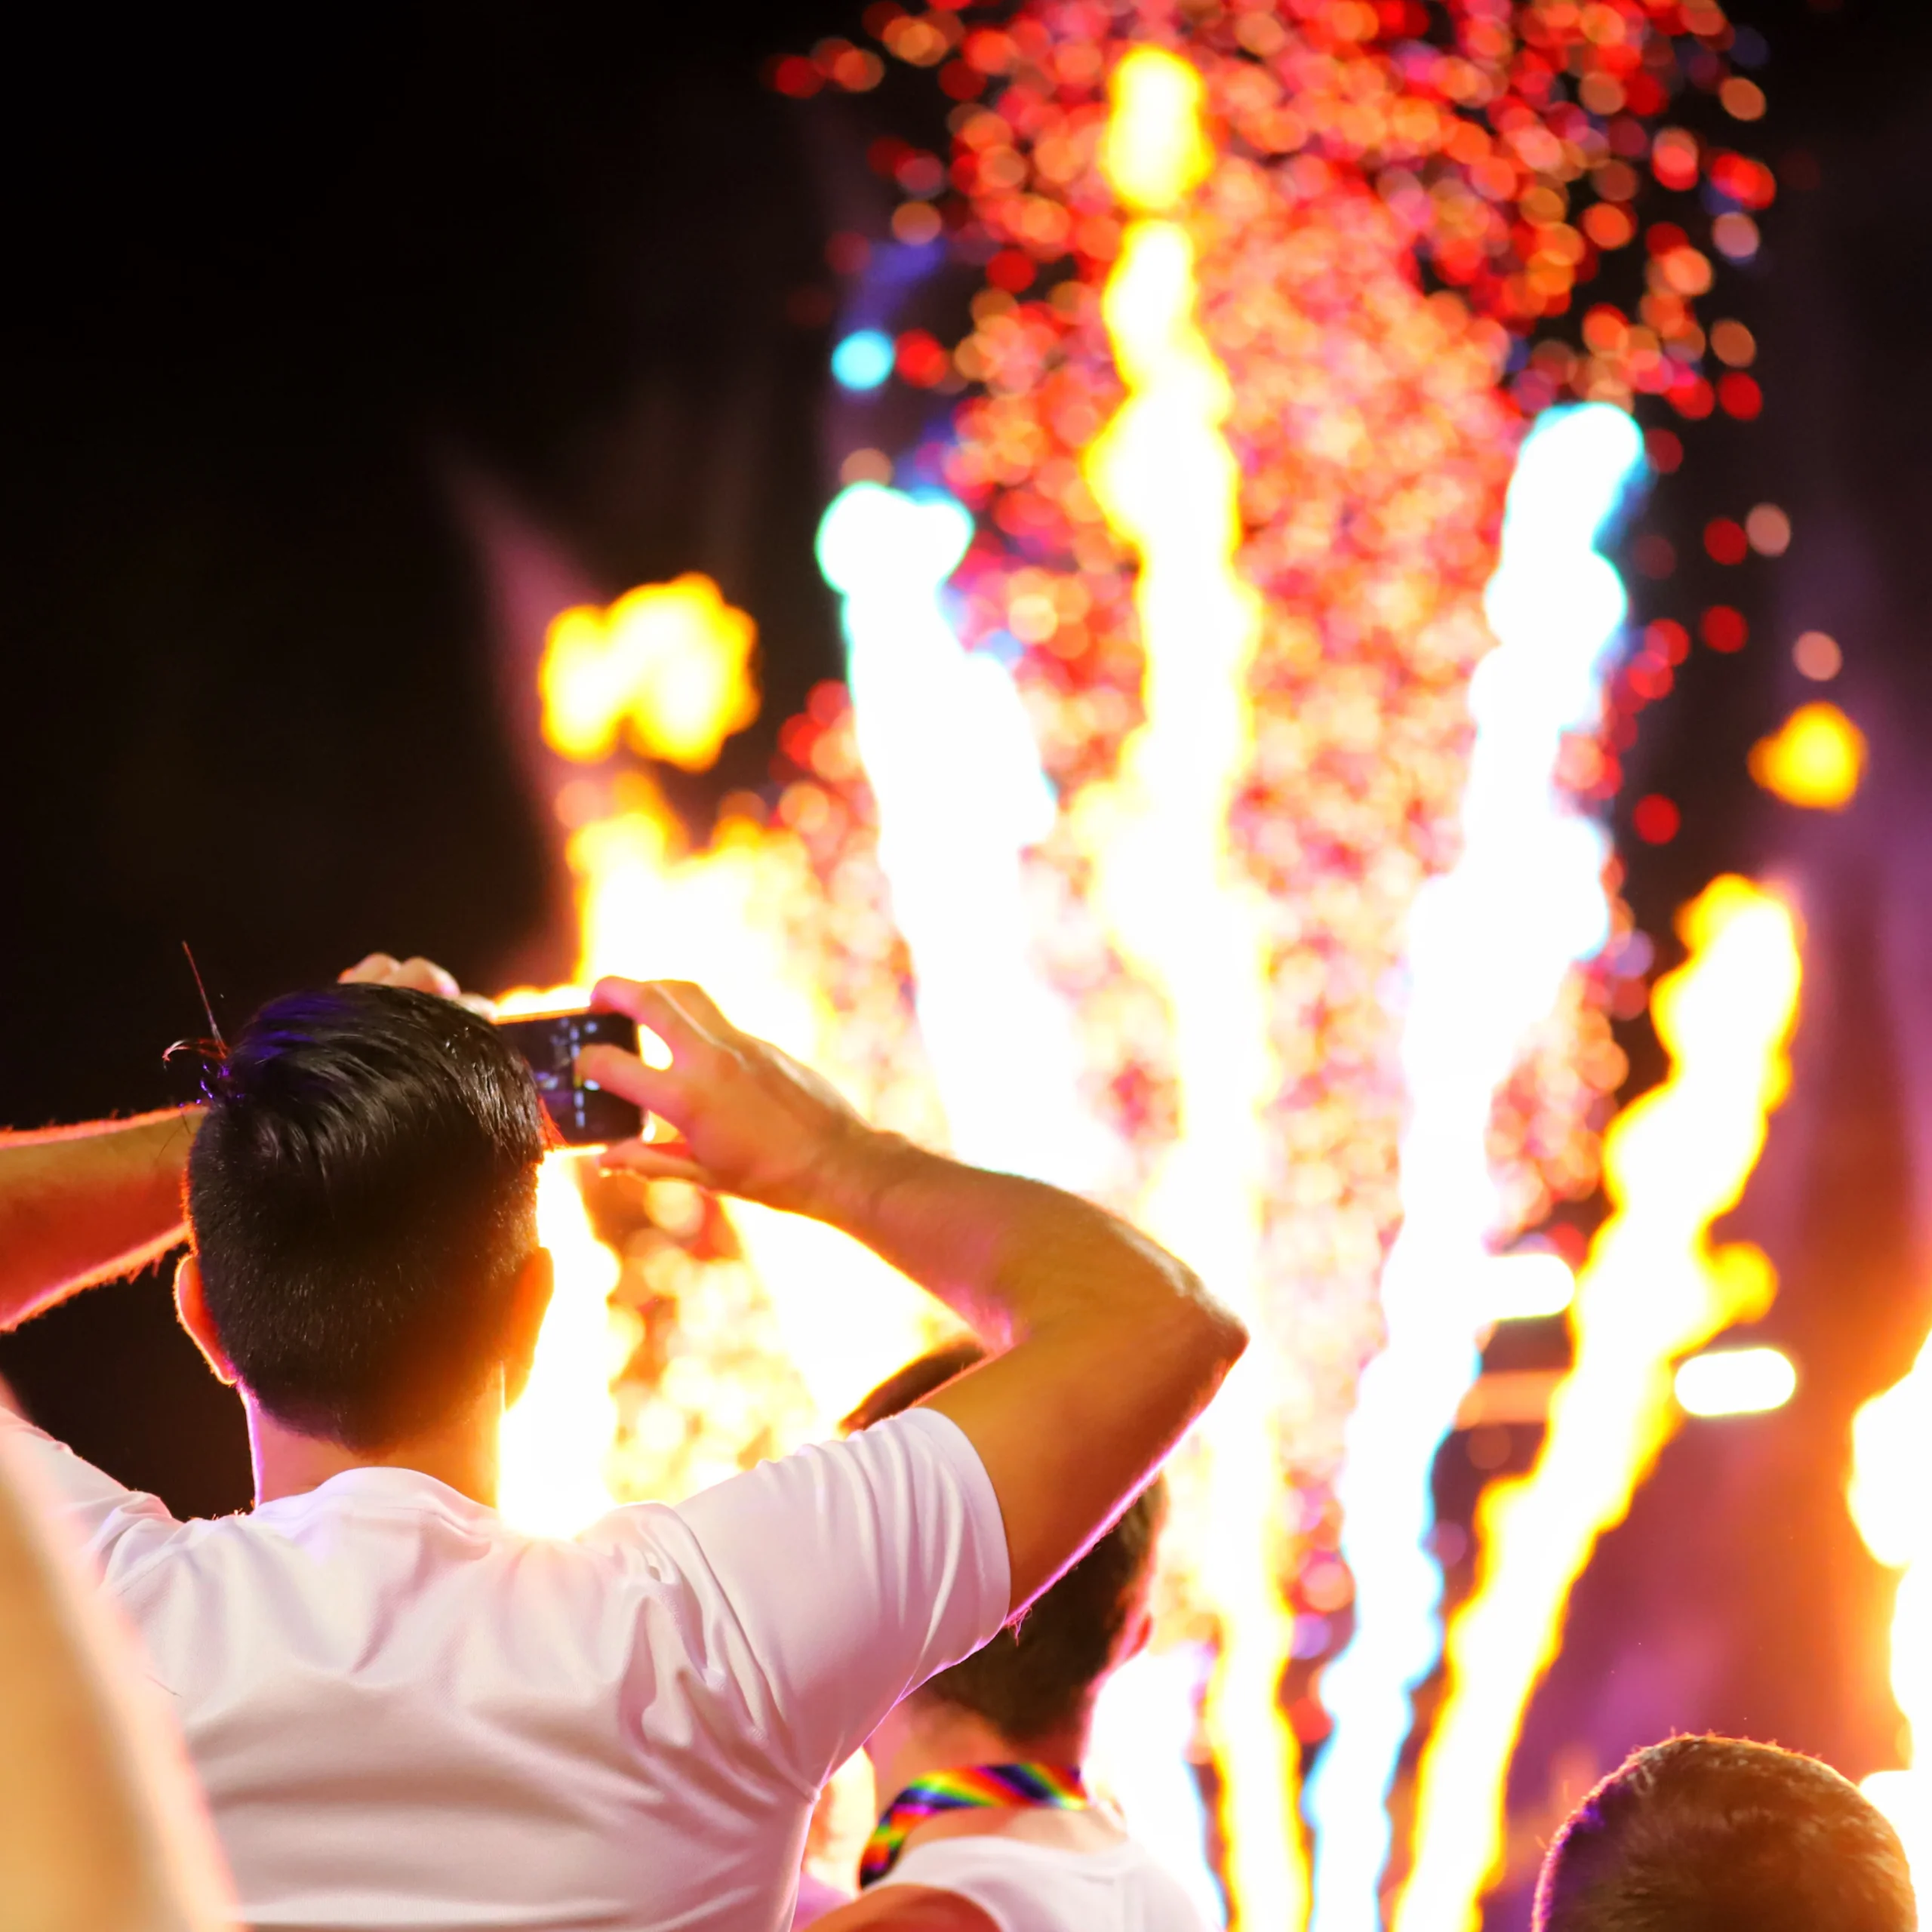 Image of a man watching fireworks at a festival